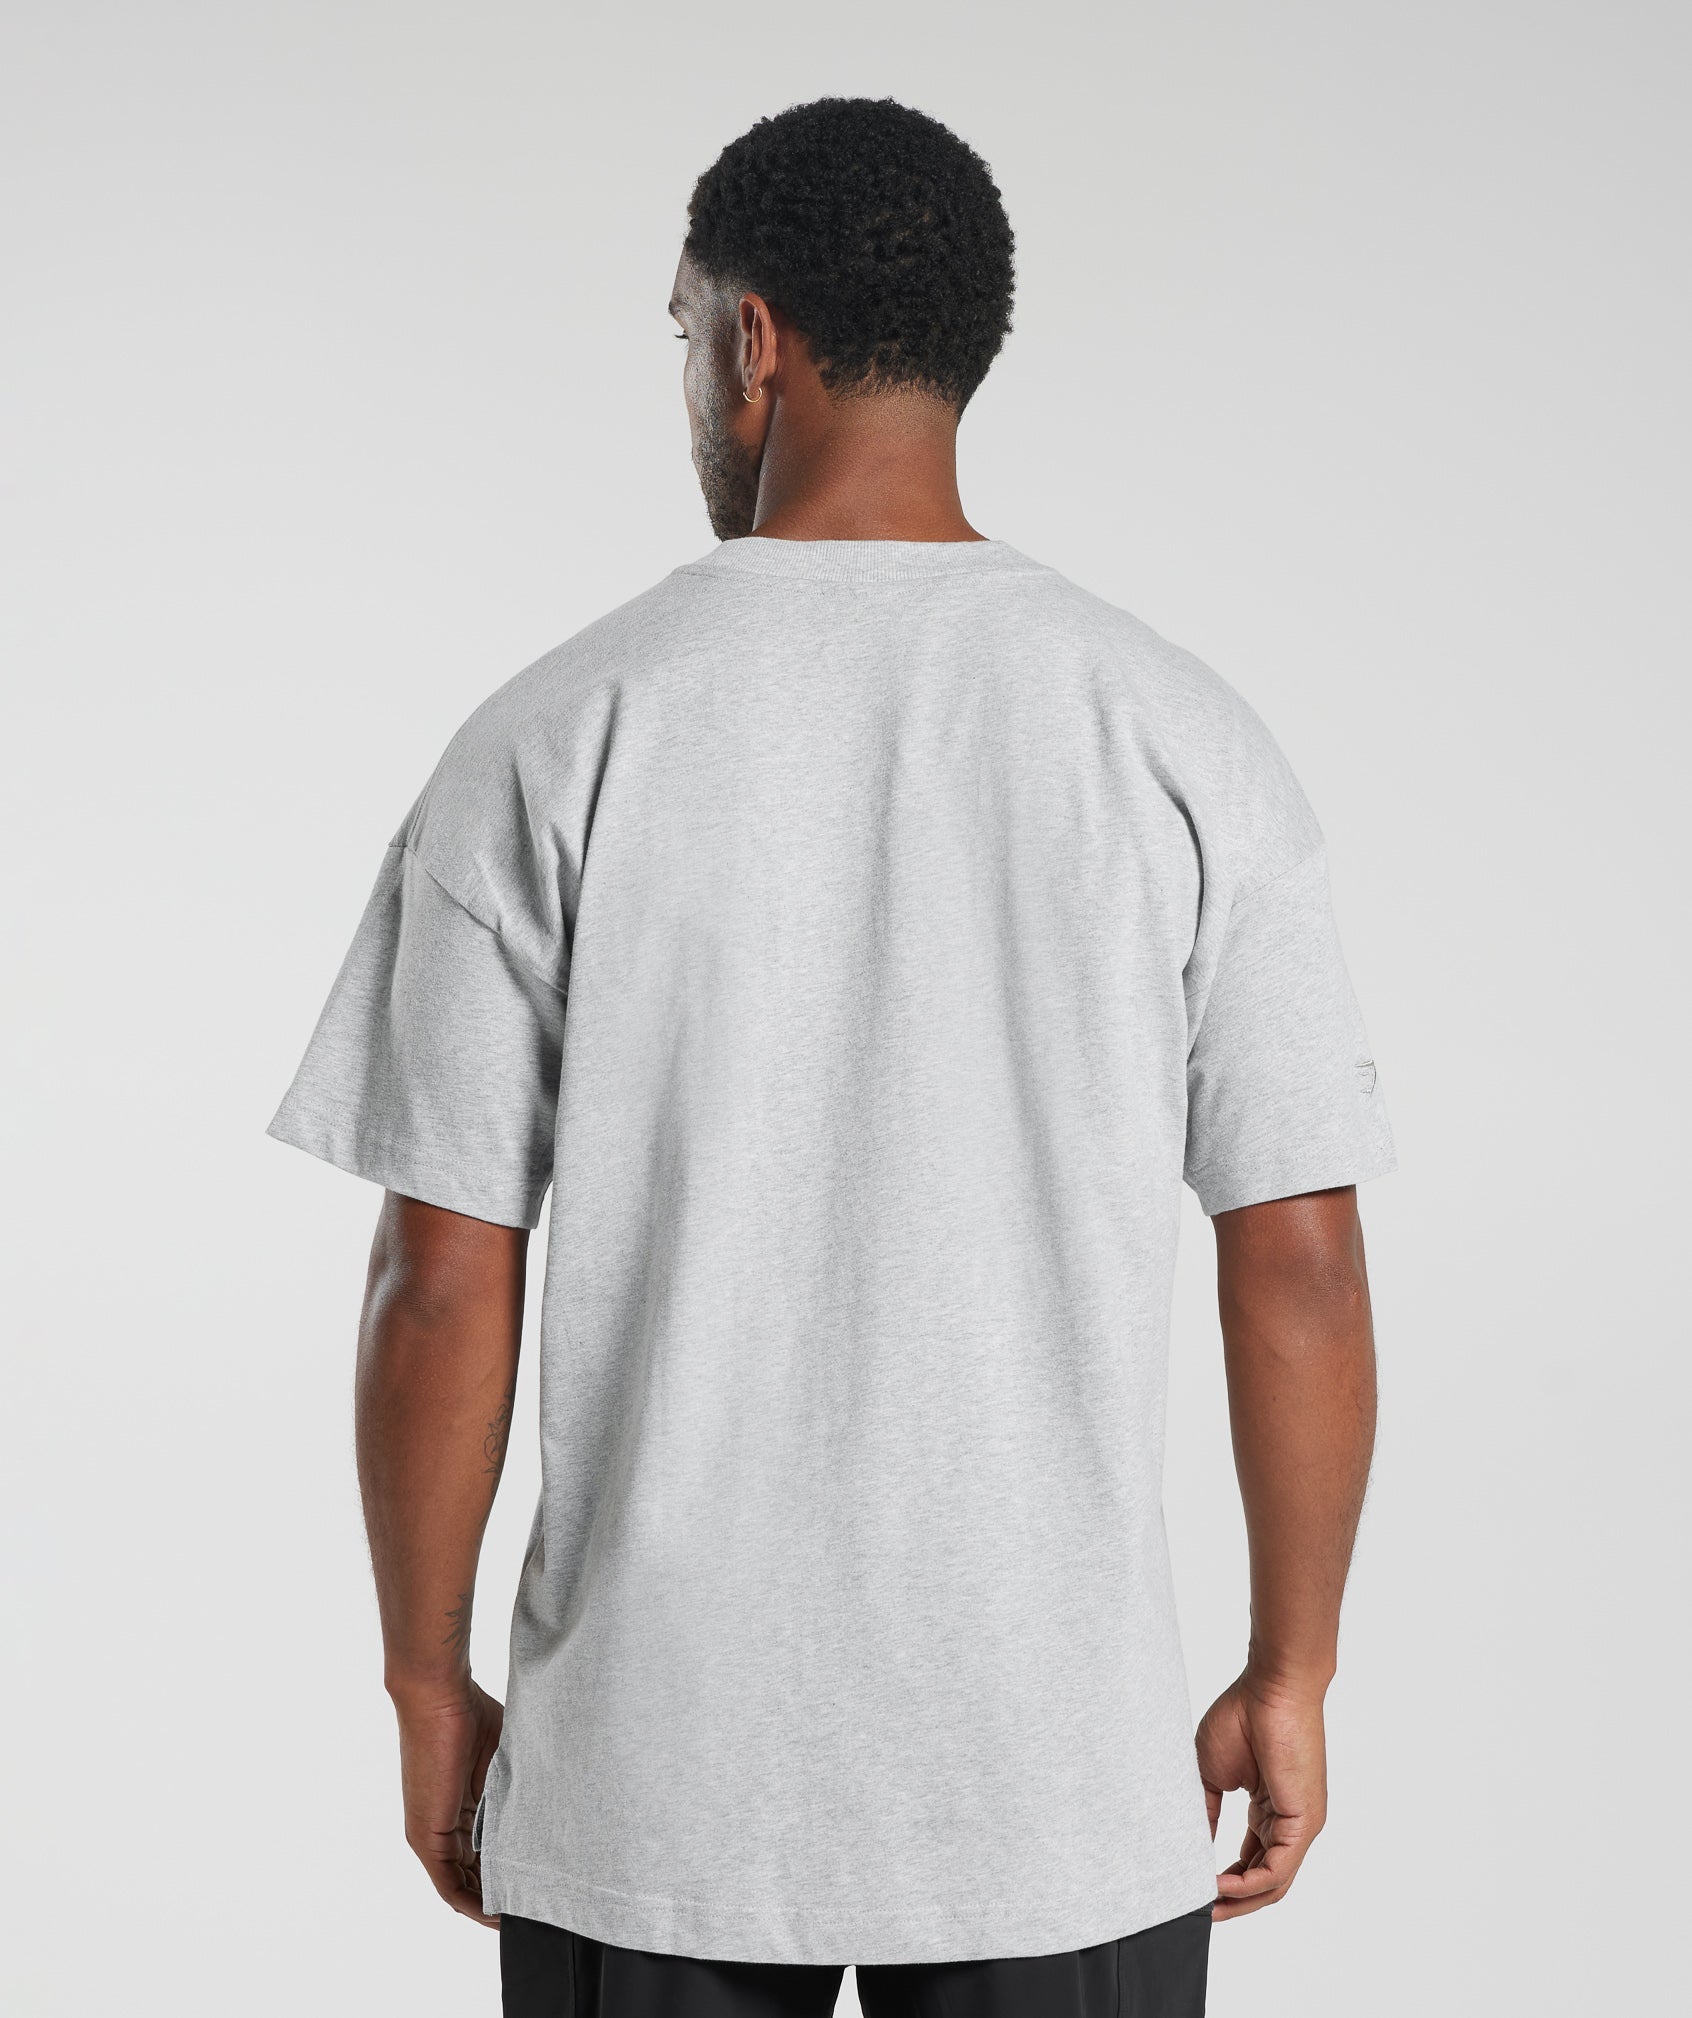 Rest Day Essentials T-Shirt in Light Grey Core Marl - view 2